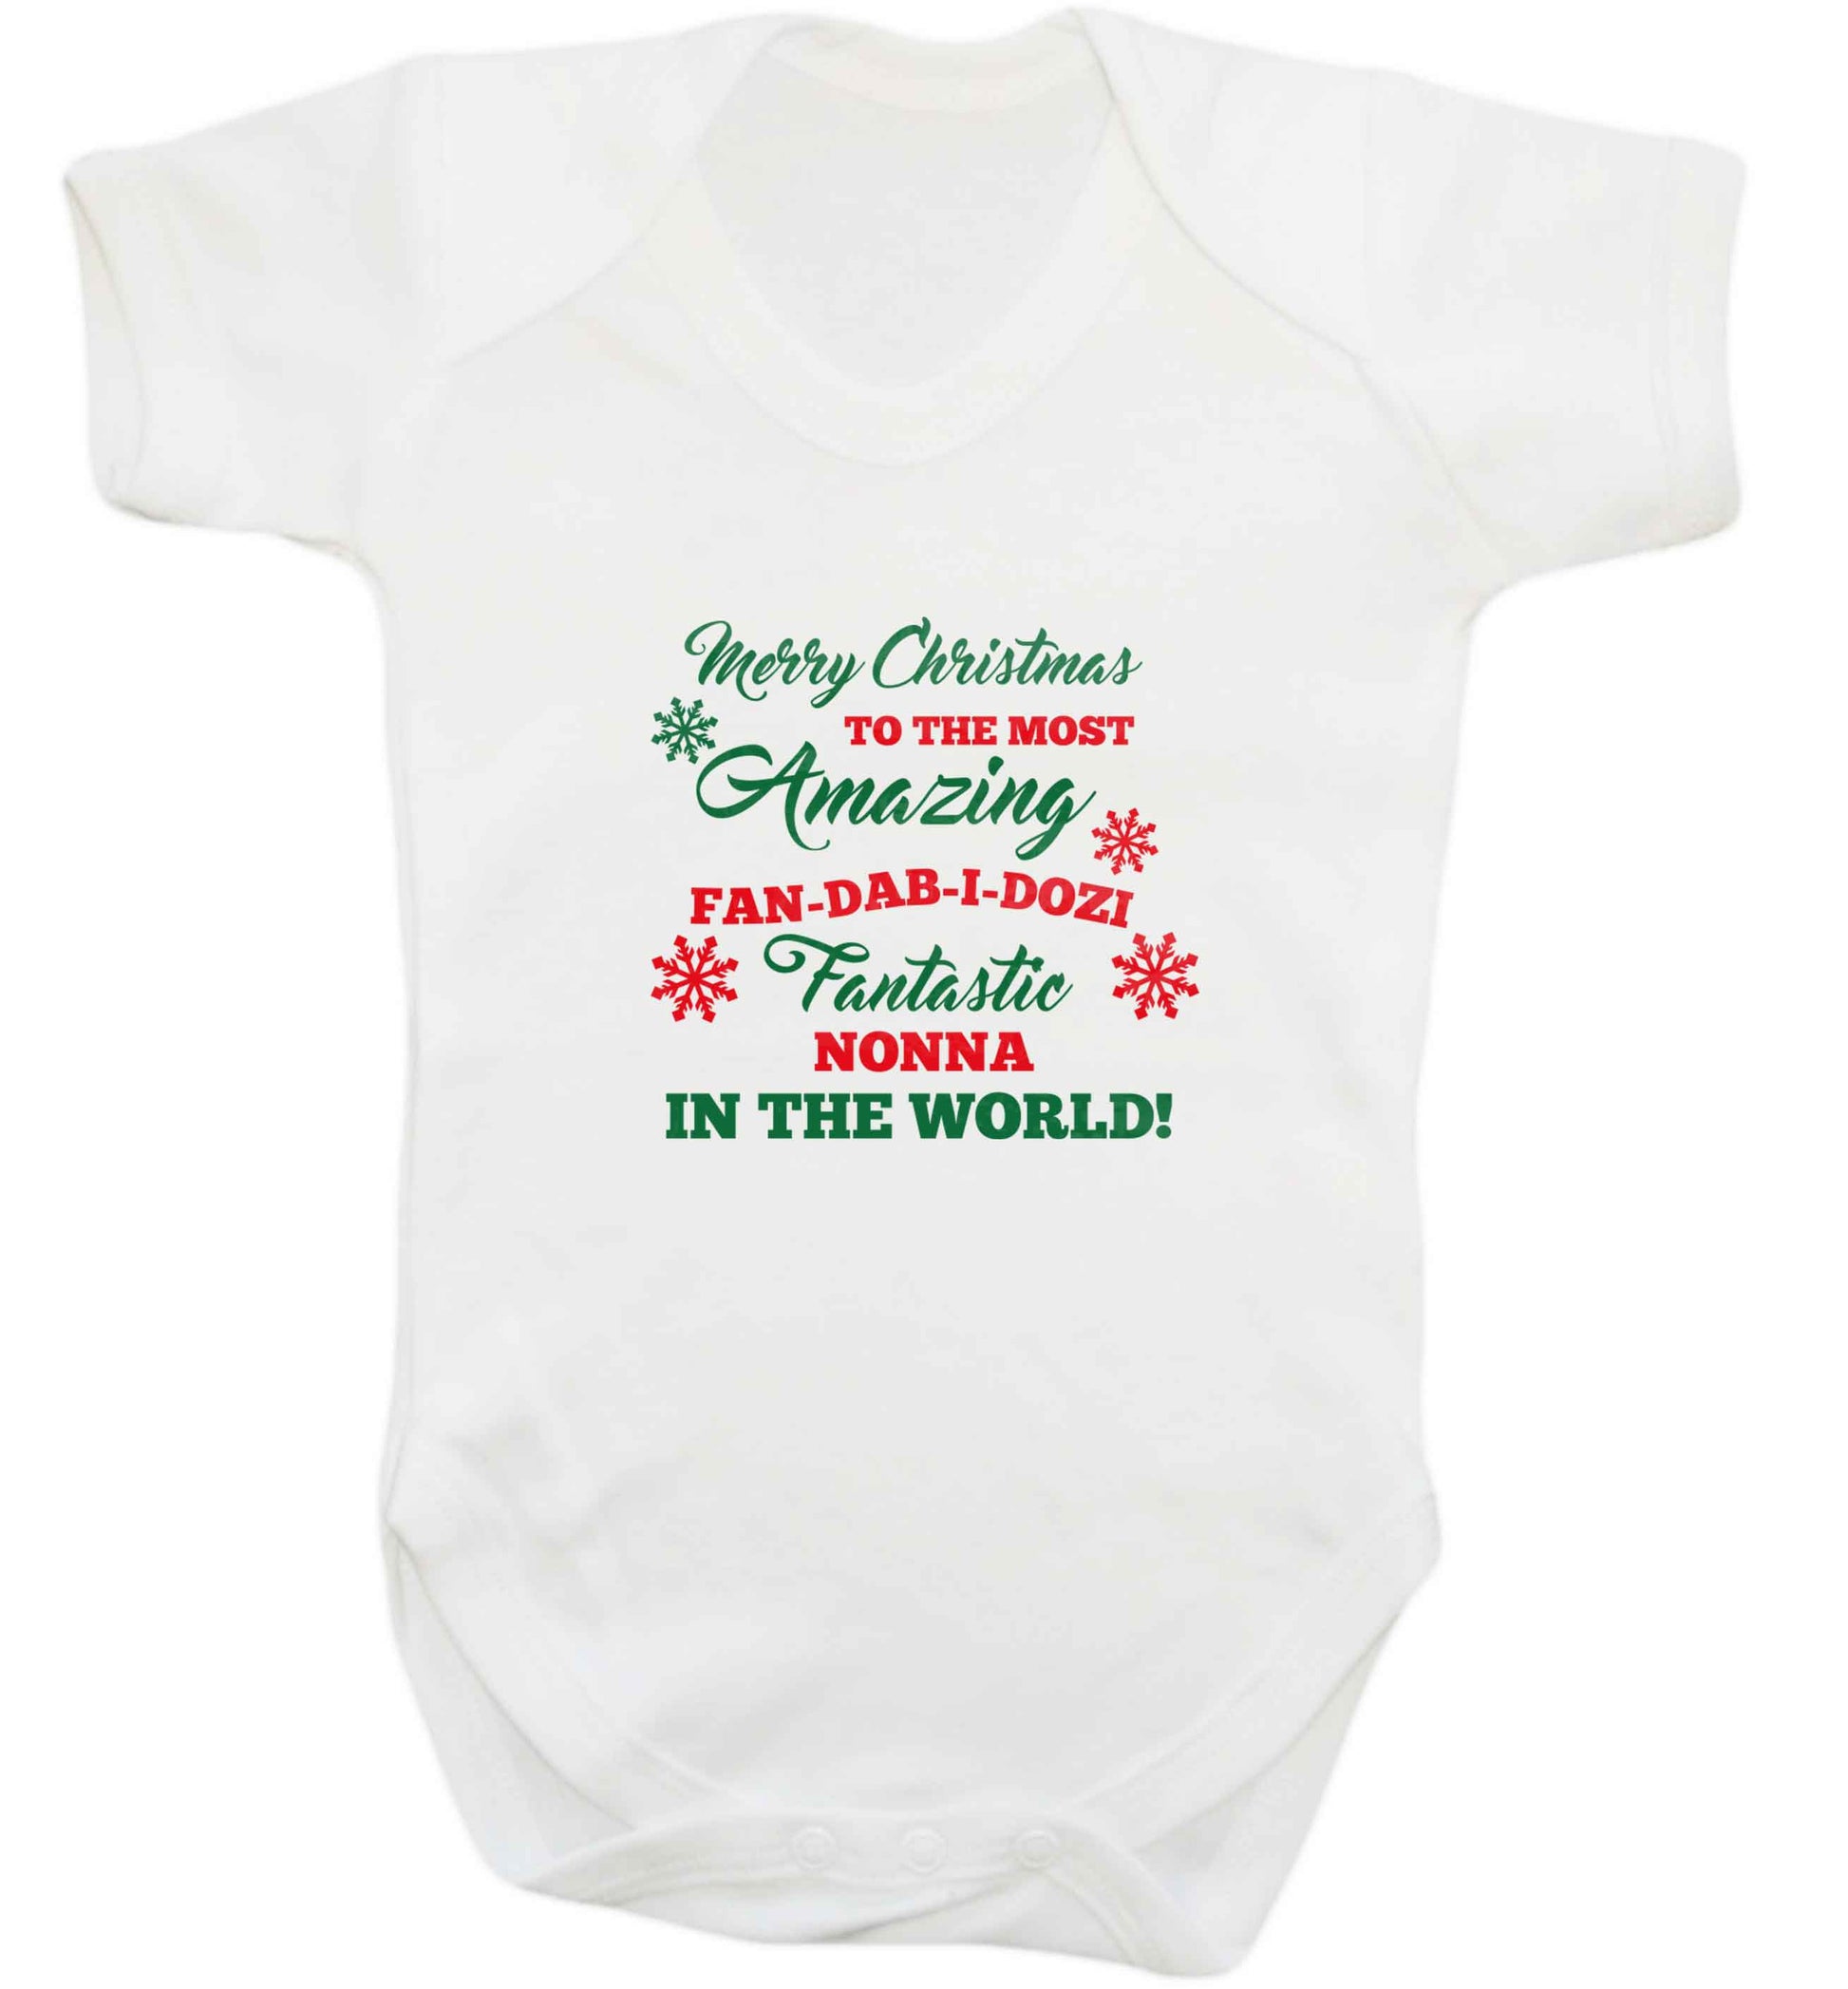 Merry Christmas to the most amazing fan-dab-i-dozi fantasic Nonna in the world baby vest white 18-24 months